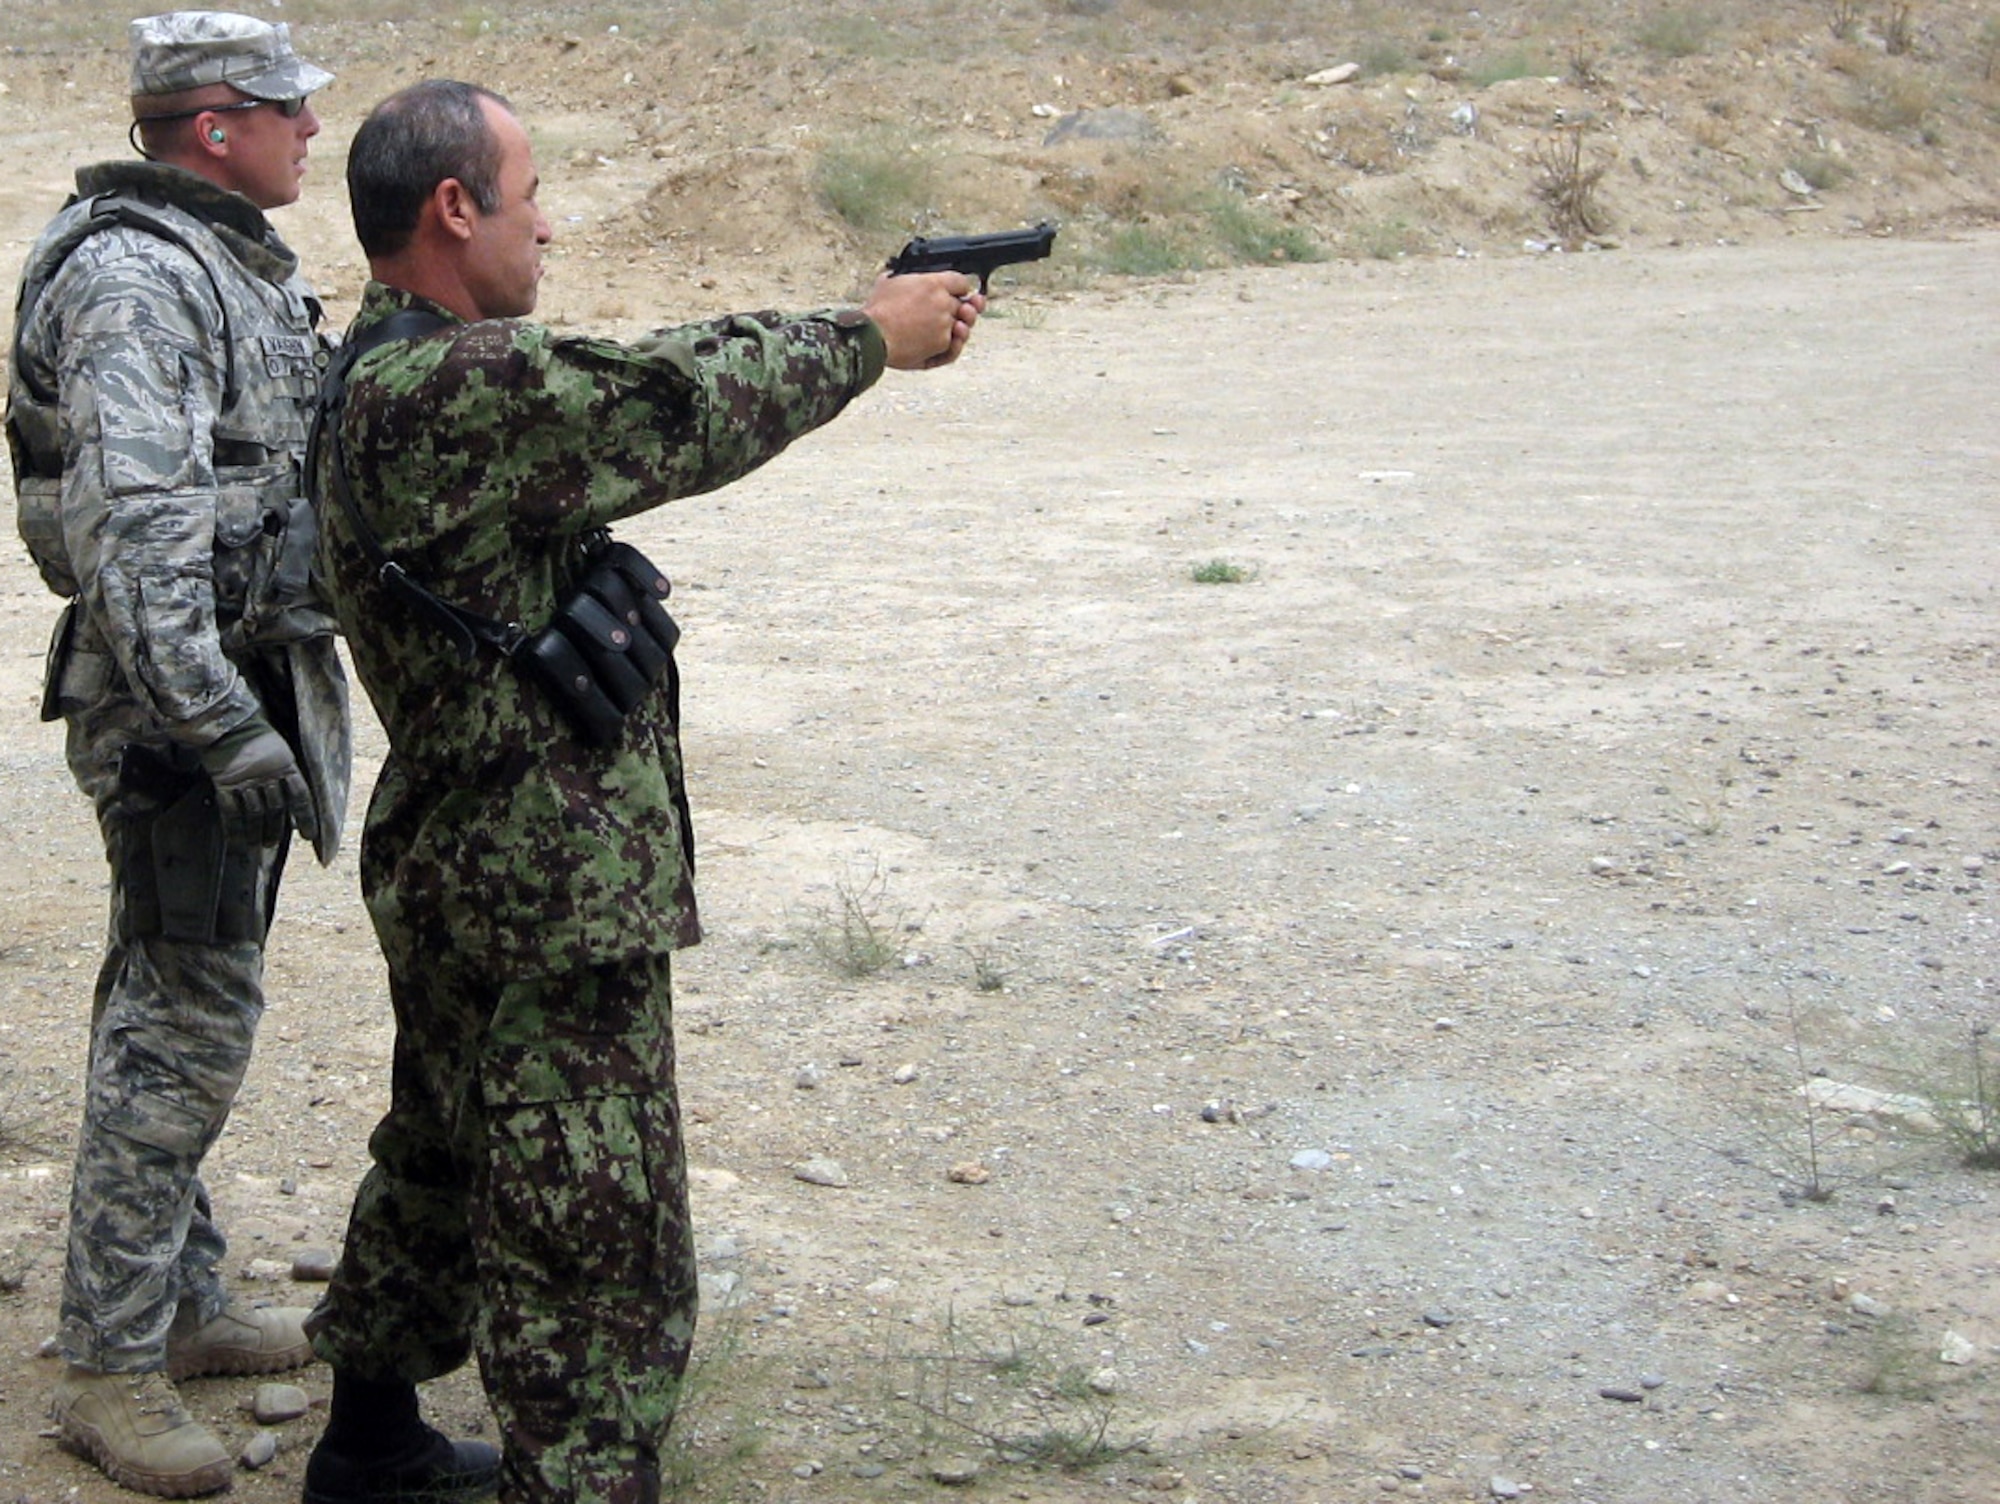 Tech. Sgt. Chad Vaughn assists an Afghan colonel on the shooting range during training near Kabul. Sergeant Vaughn is deployed from the 27th Special Operations Security Forces Squadron, Cannon AFB, N.M. (Courtesy photo)